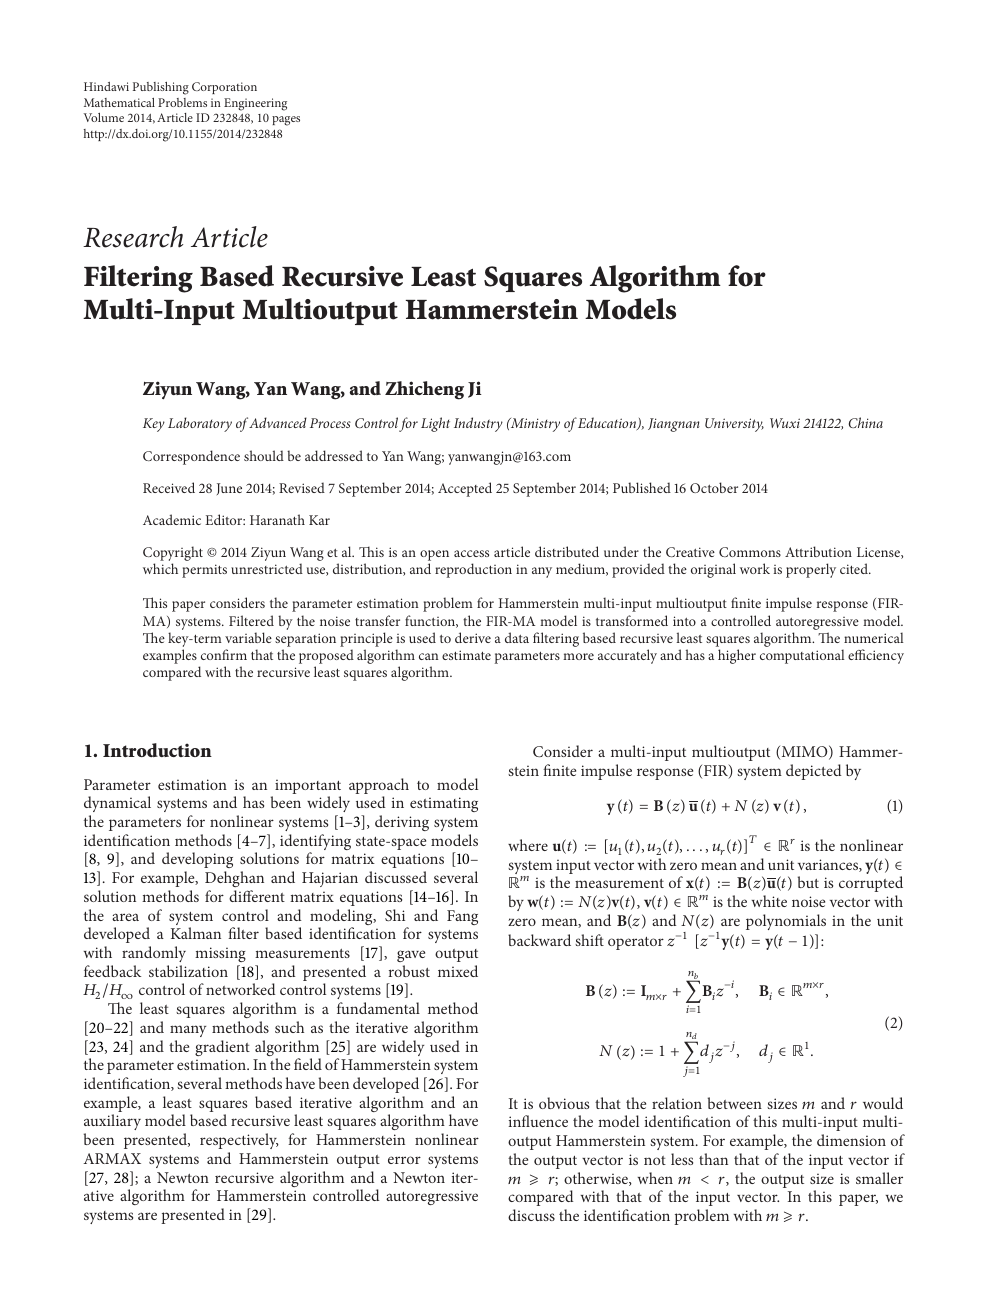 Filtering Based Recursive Least Squares Algorithm For Multi Input Multioutput Hammerstein Models Topic Of Research Paper In Mathematics Download Scholarly Article Pdf And Read For Free On Cyberleninka Open Science Hub